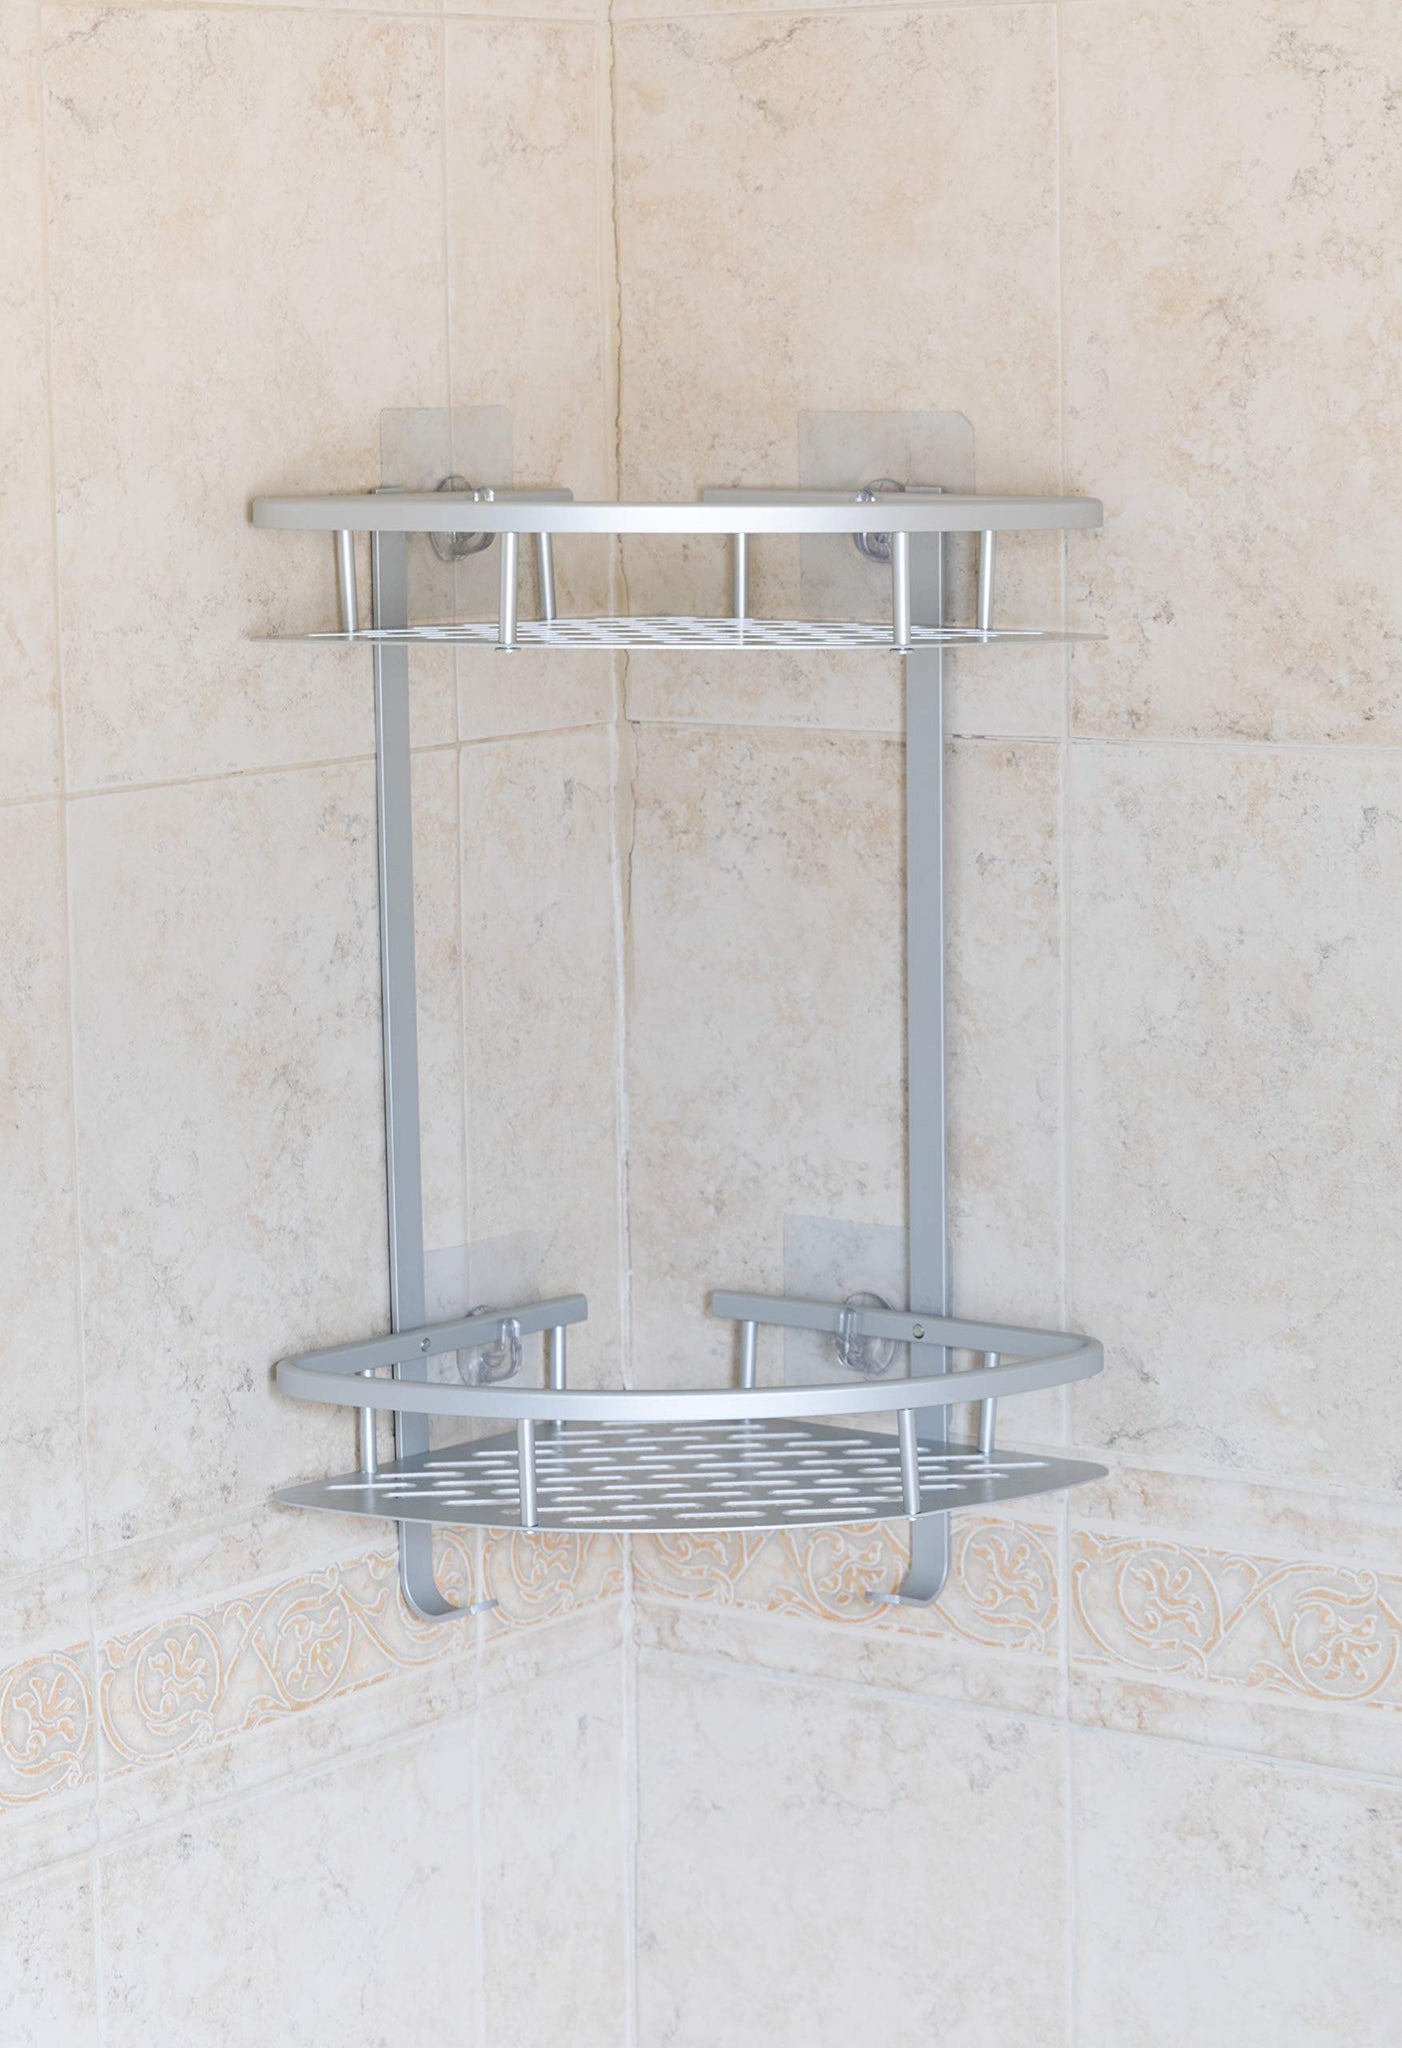 Homeries Shower Caddy - Durable 2 Layers No Rust Aluminum Bathroom She